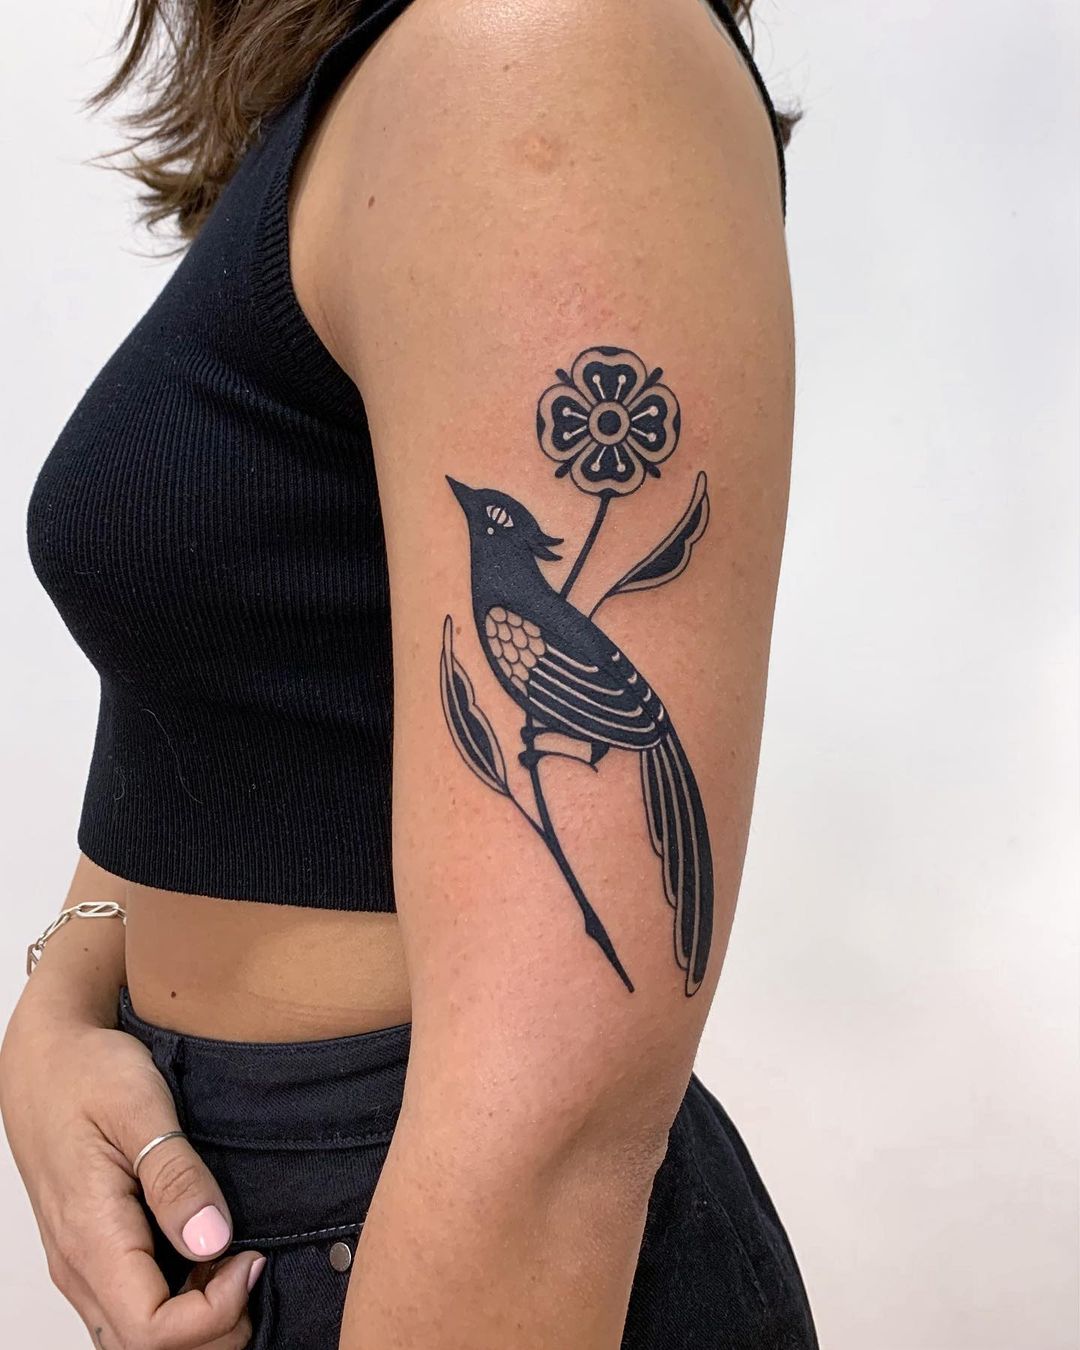 Top 10 Most Popular Tattoo Designs of All Time | Women's Alphabet